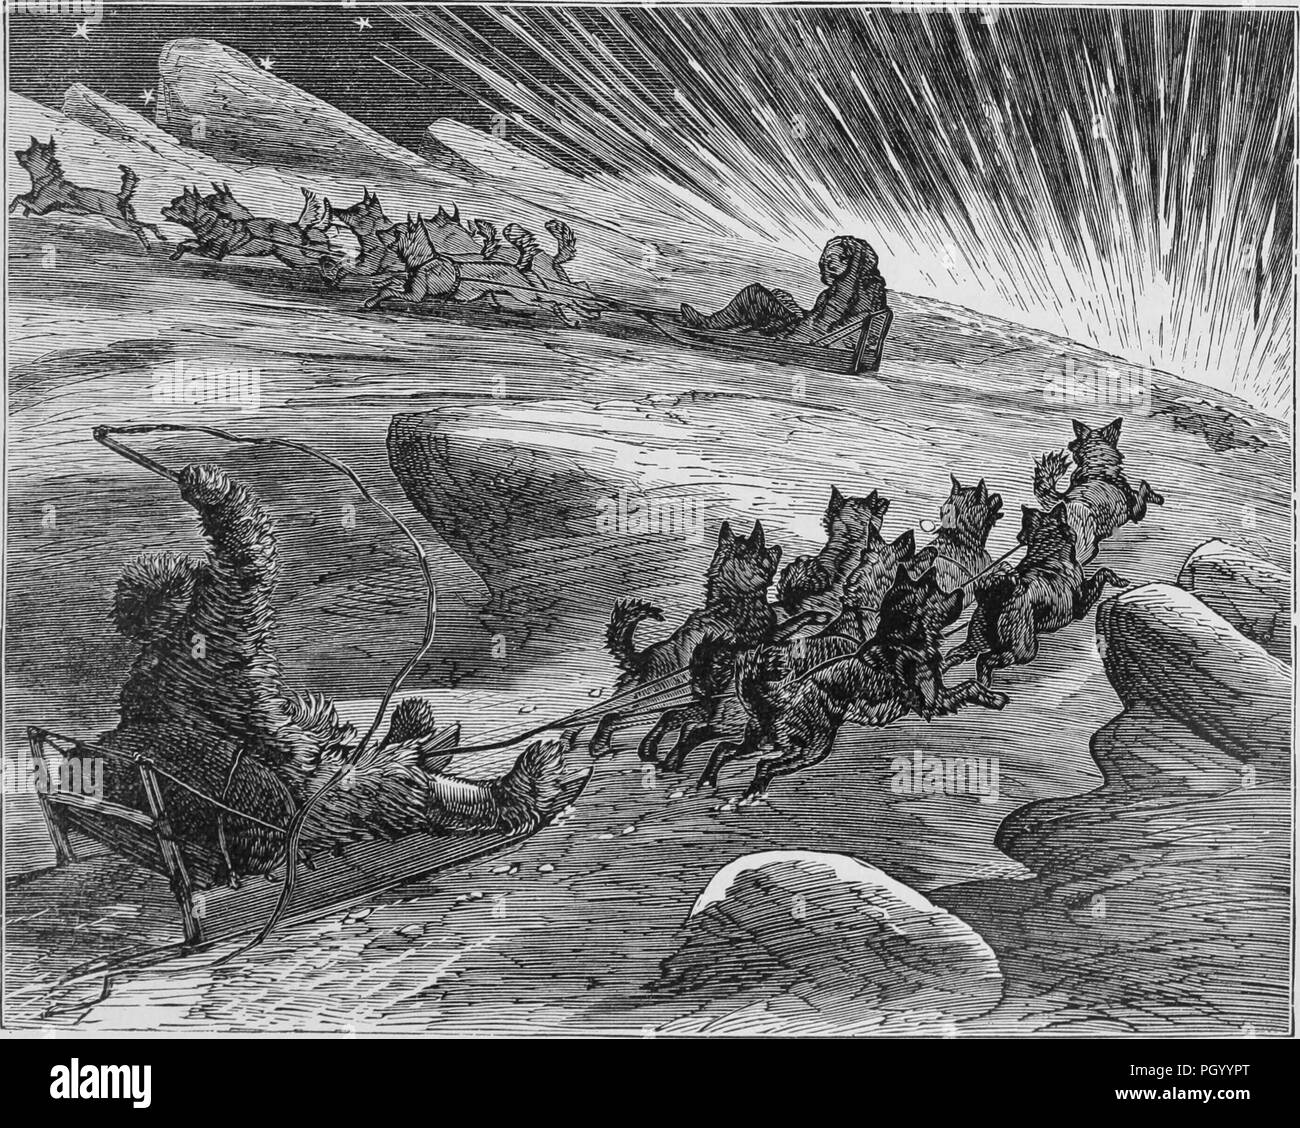 Black and white vintage print, depicting Eskimos wearing fur coats and boots, while driving dogsleds through a frozen landscape, published in John George Wood's volume 'The uncivilized races of men in all countries of the world, being a comprehensive account of their manners and customs, and of their physical, social, mental, moral and religious characteristics', 1877. Courtesy Internet Archive. () Stock Photo